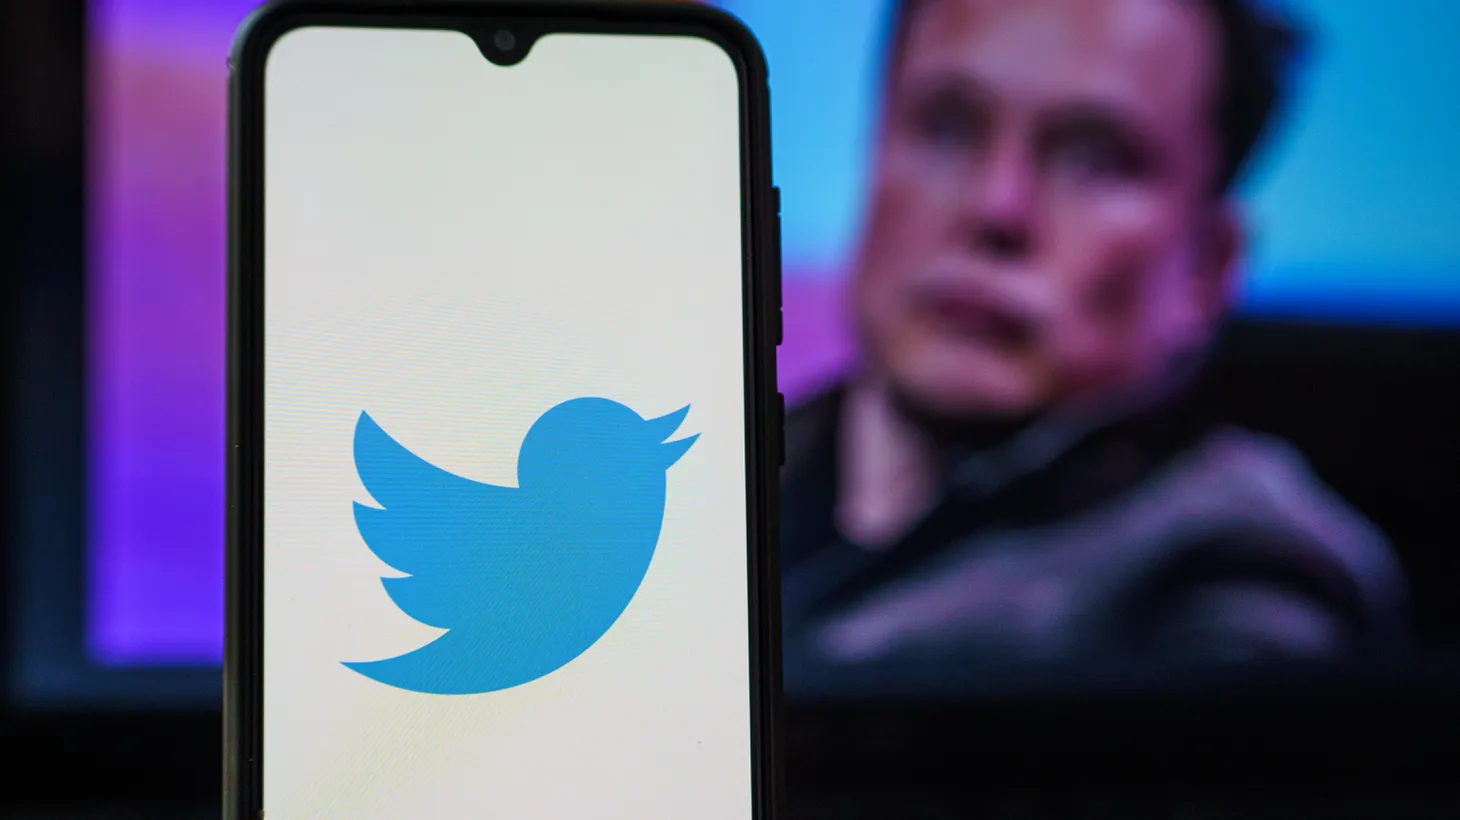 Twitter accepted a $44 billion bid from Elon Musk, which would give the business magnate complete ownership of the platform and take it private.